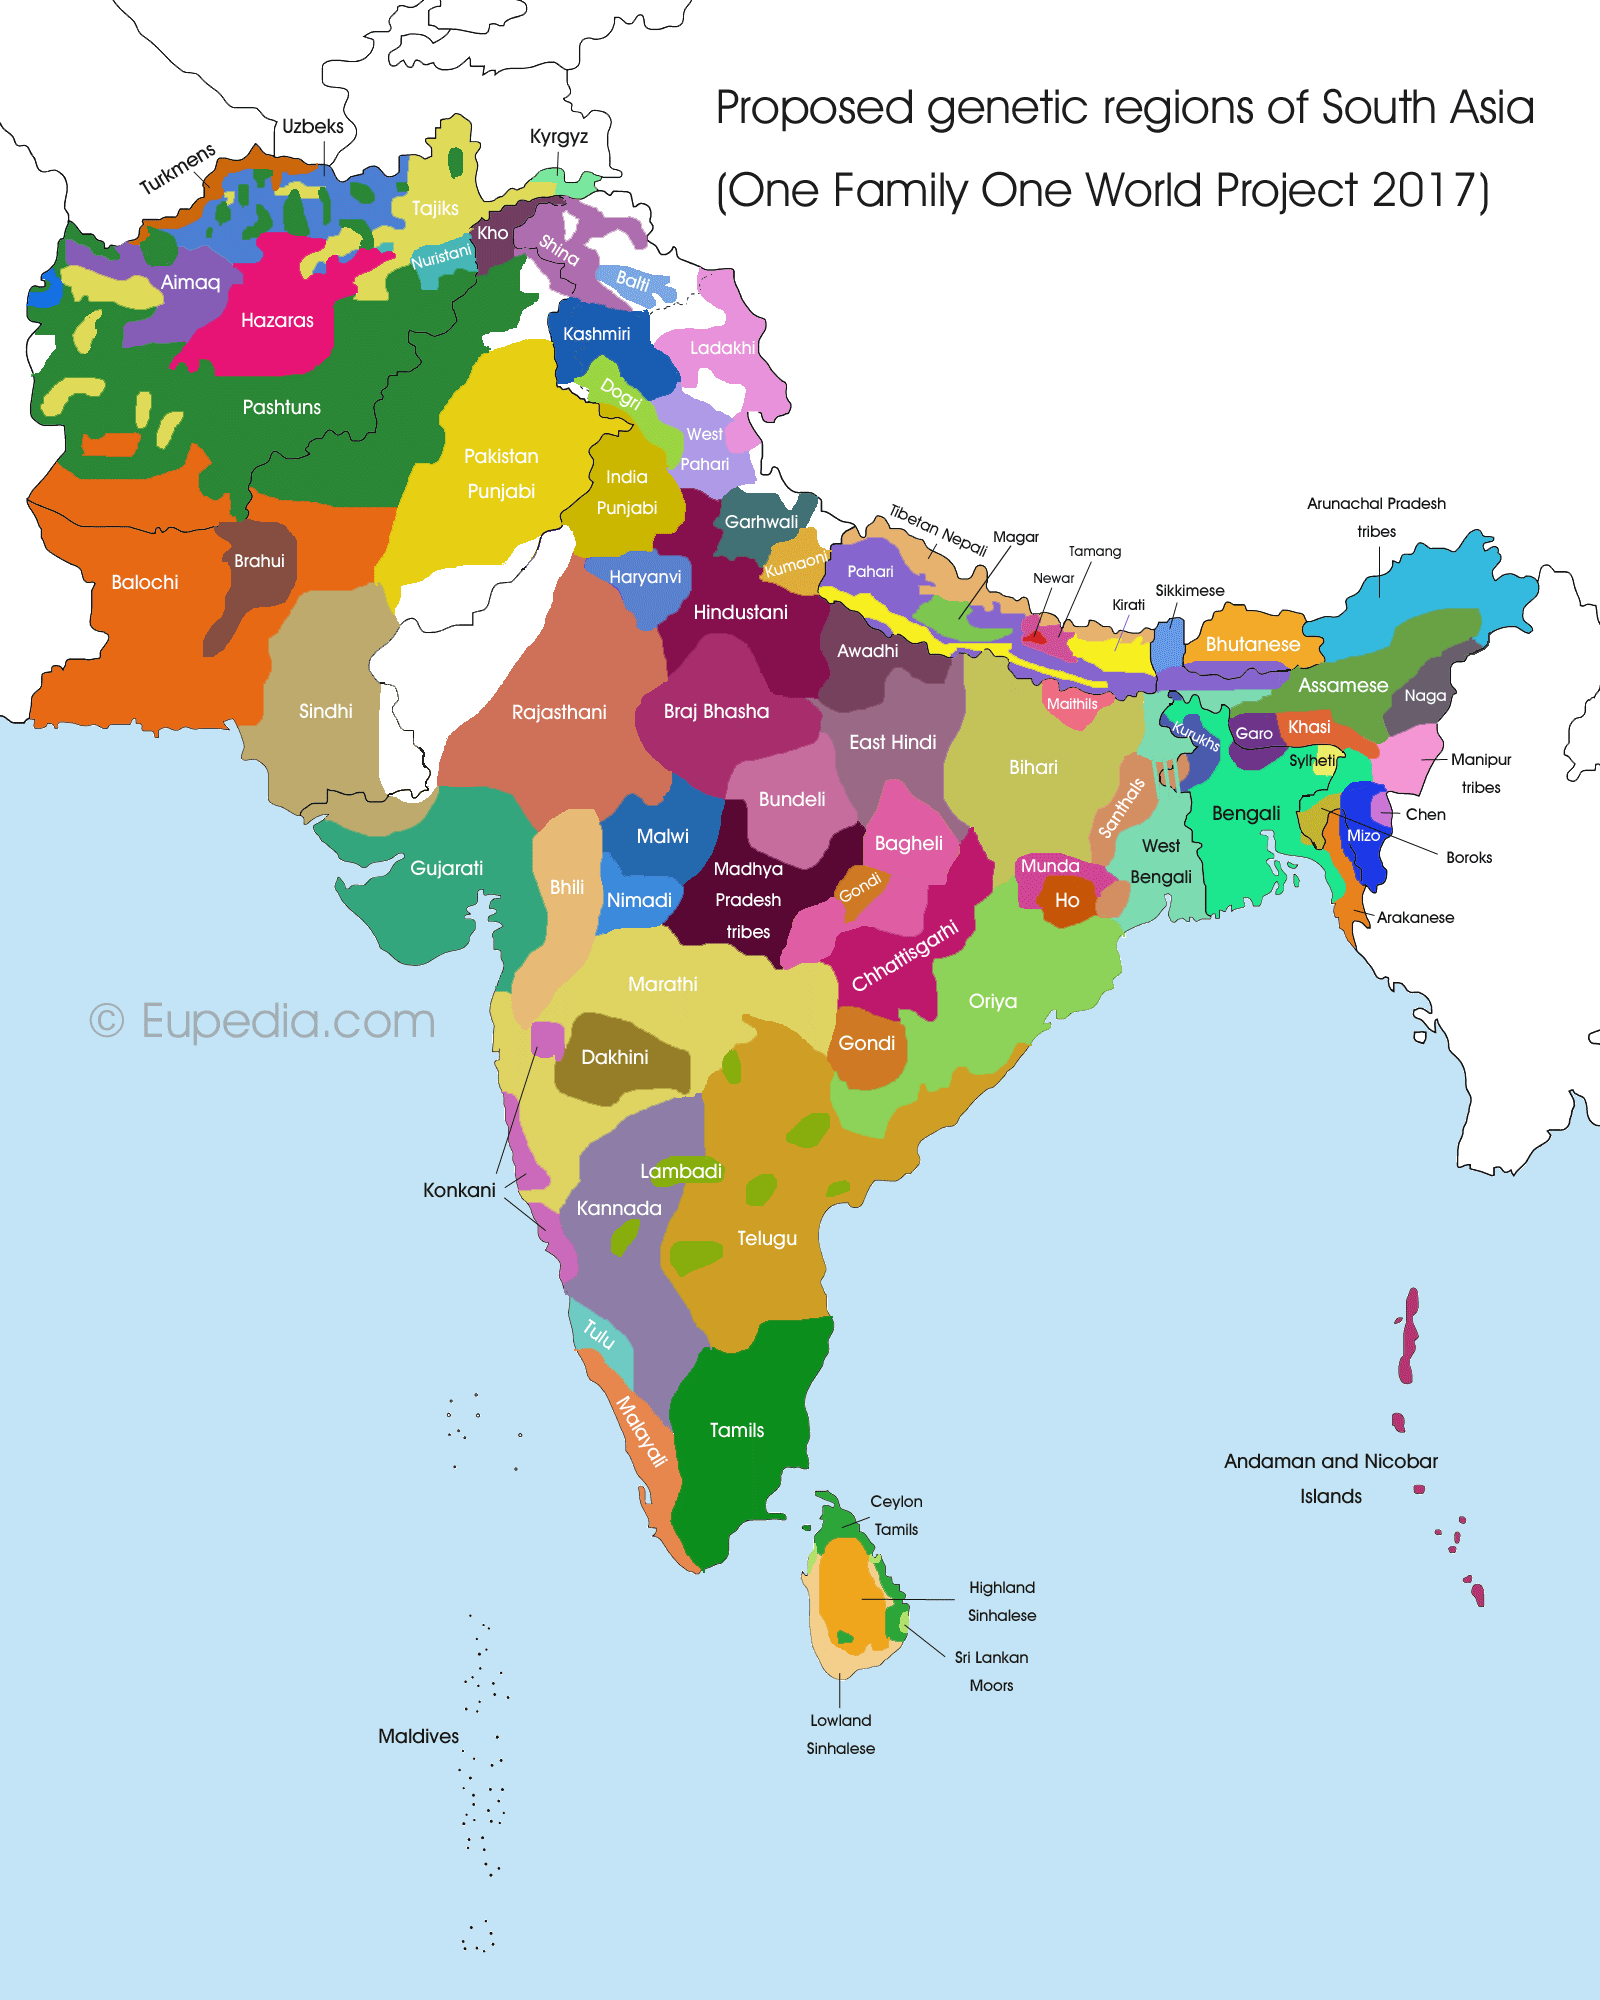 Proposed genetic divisions of South Asia - One Family One World DNA Project